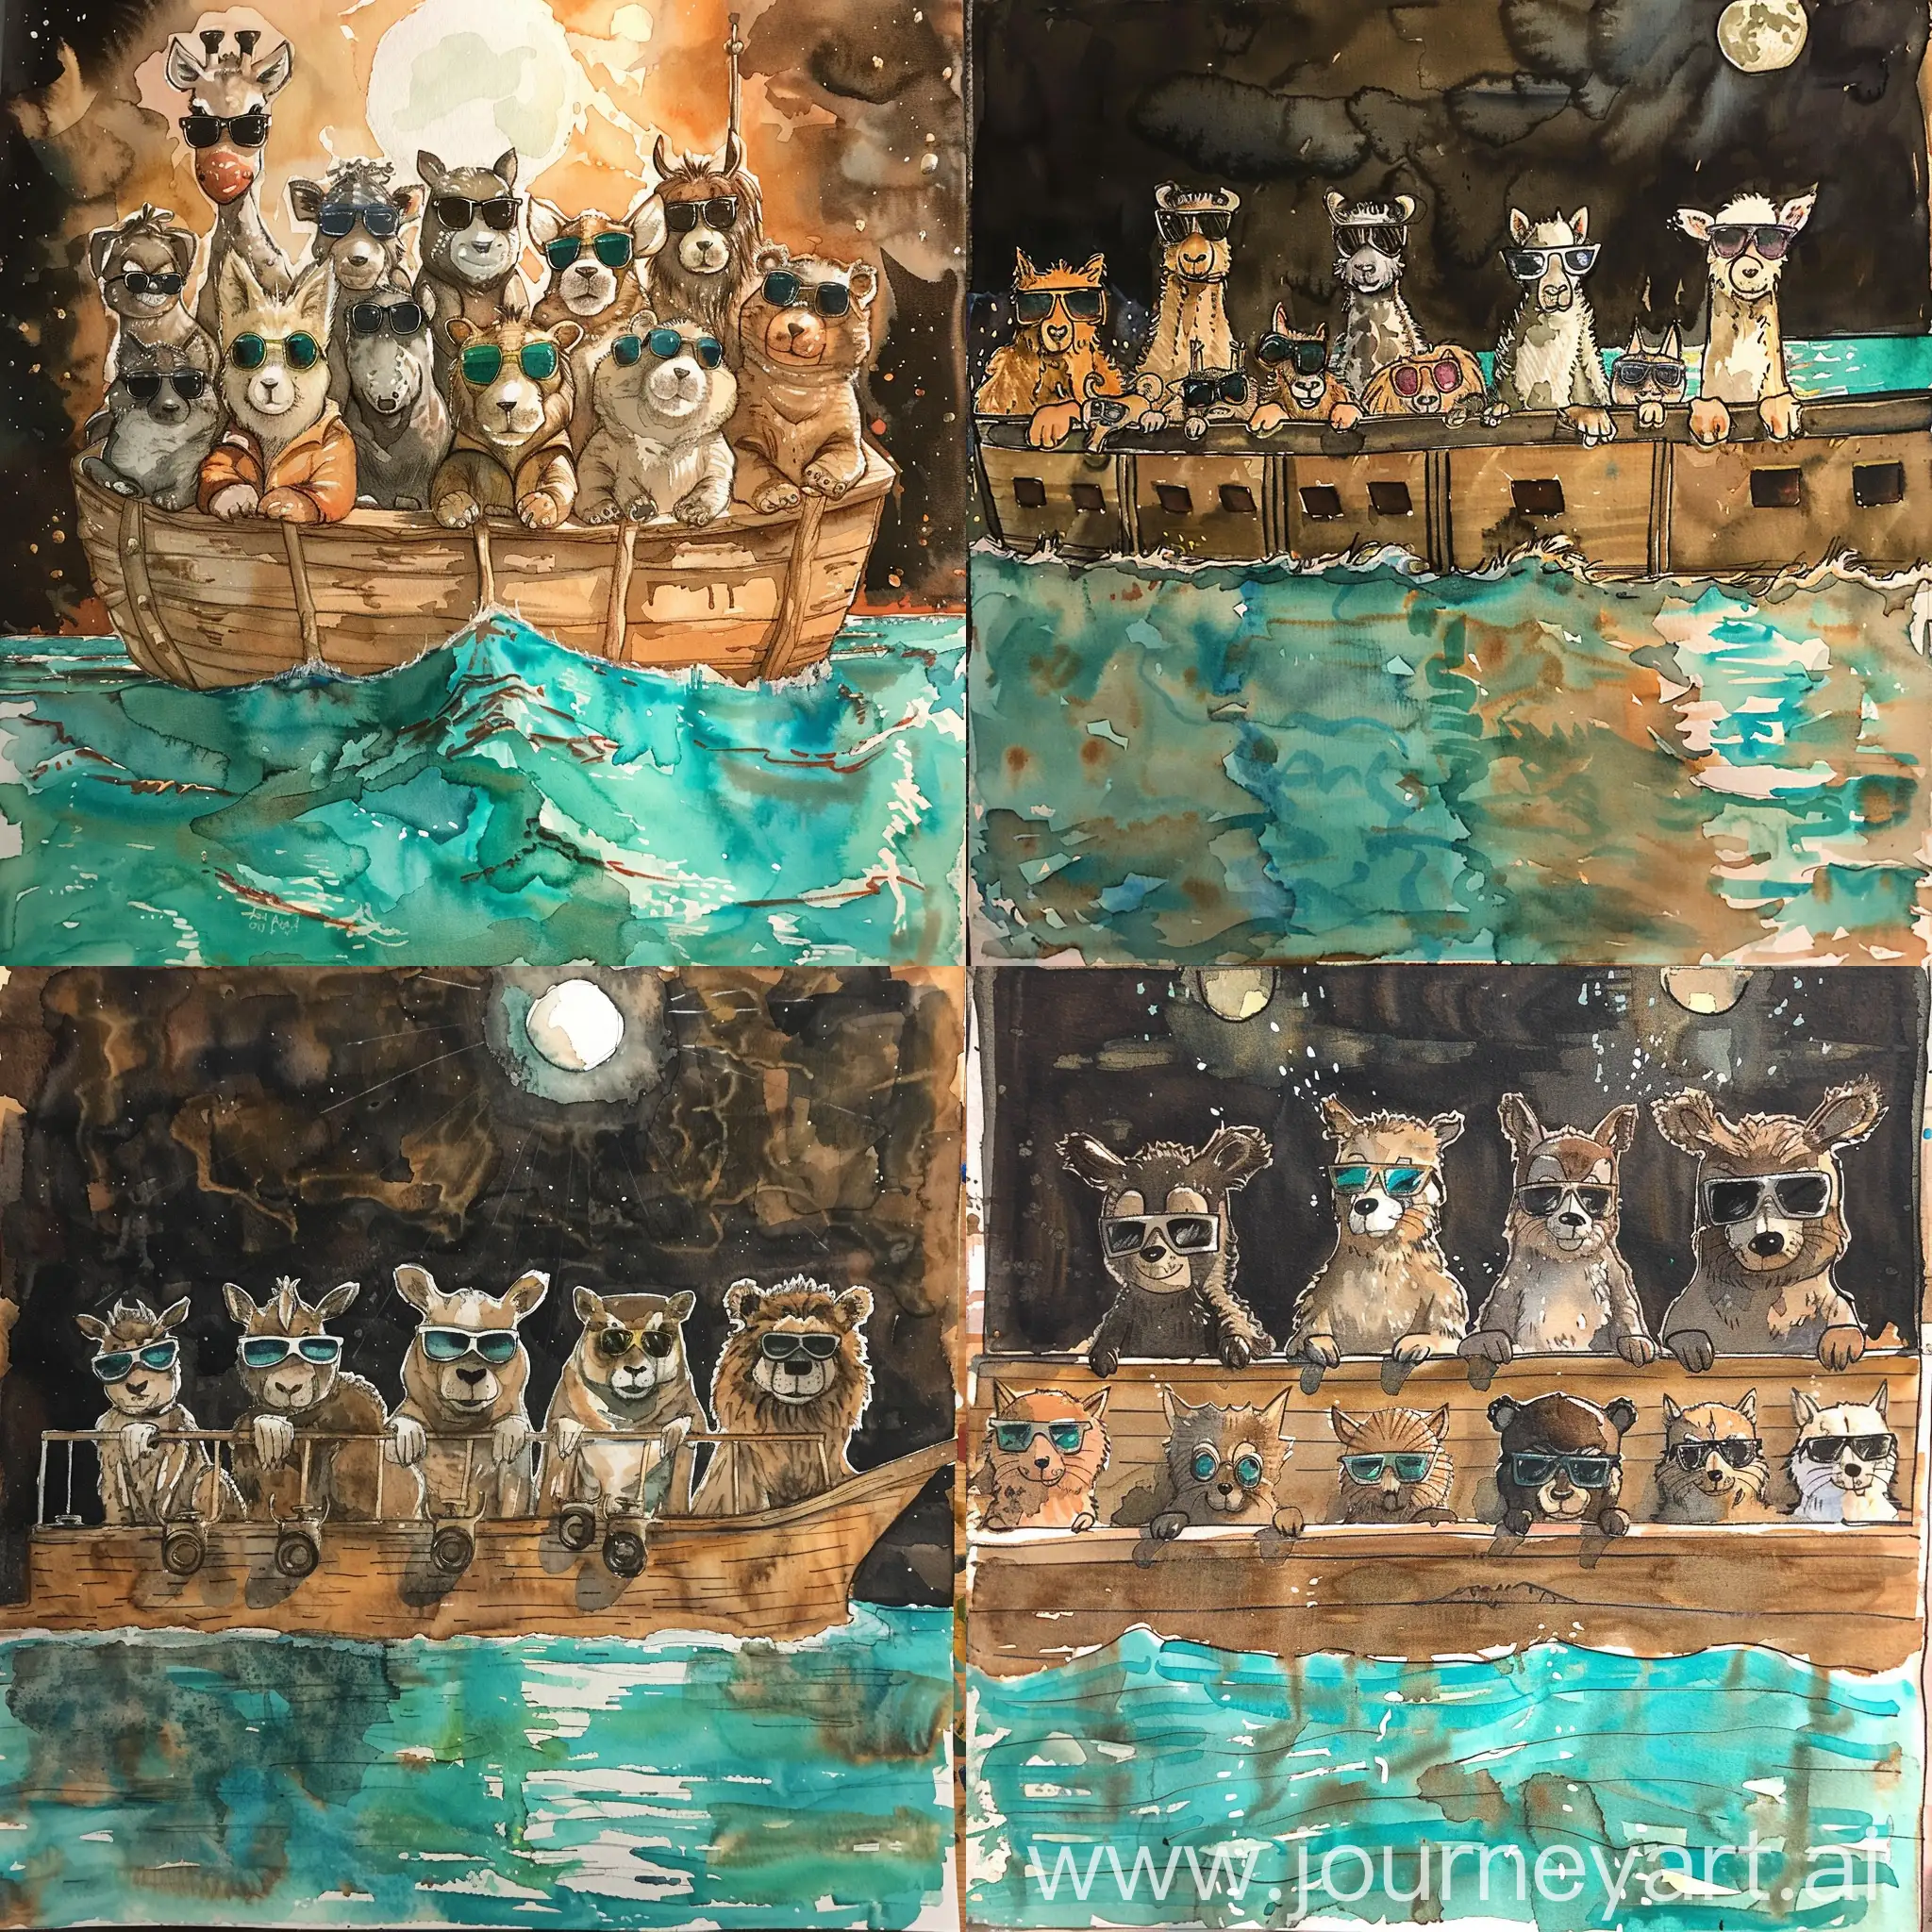 Make a water color painting of Noah's ark on a yacht. All the animals are wearing sunglasses. The water is turqouise. The water is brown and it is late at night. Only lit by moon light